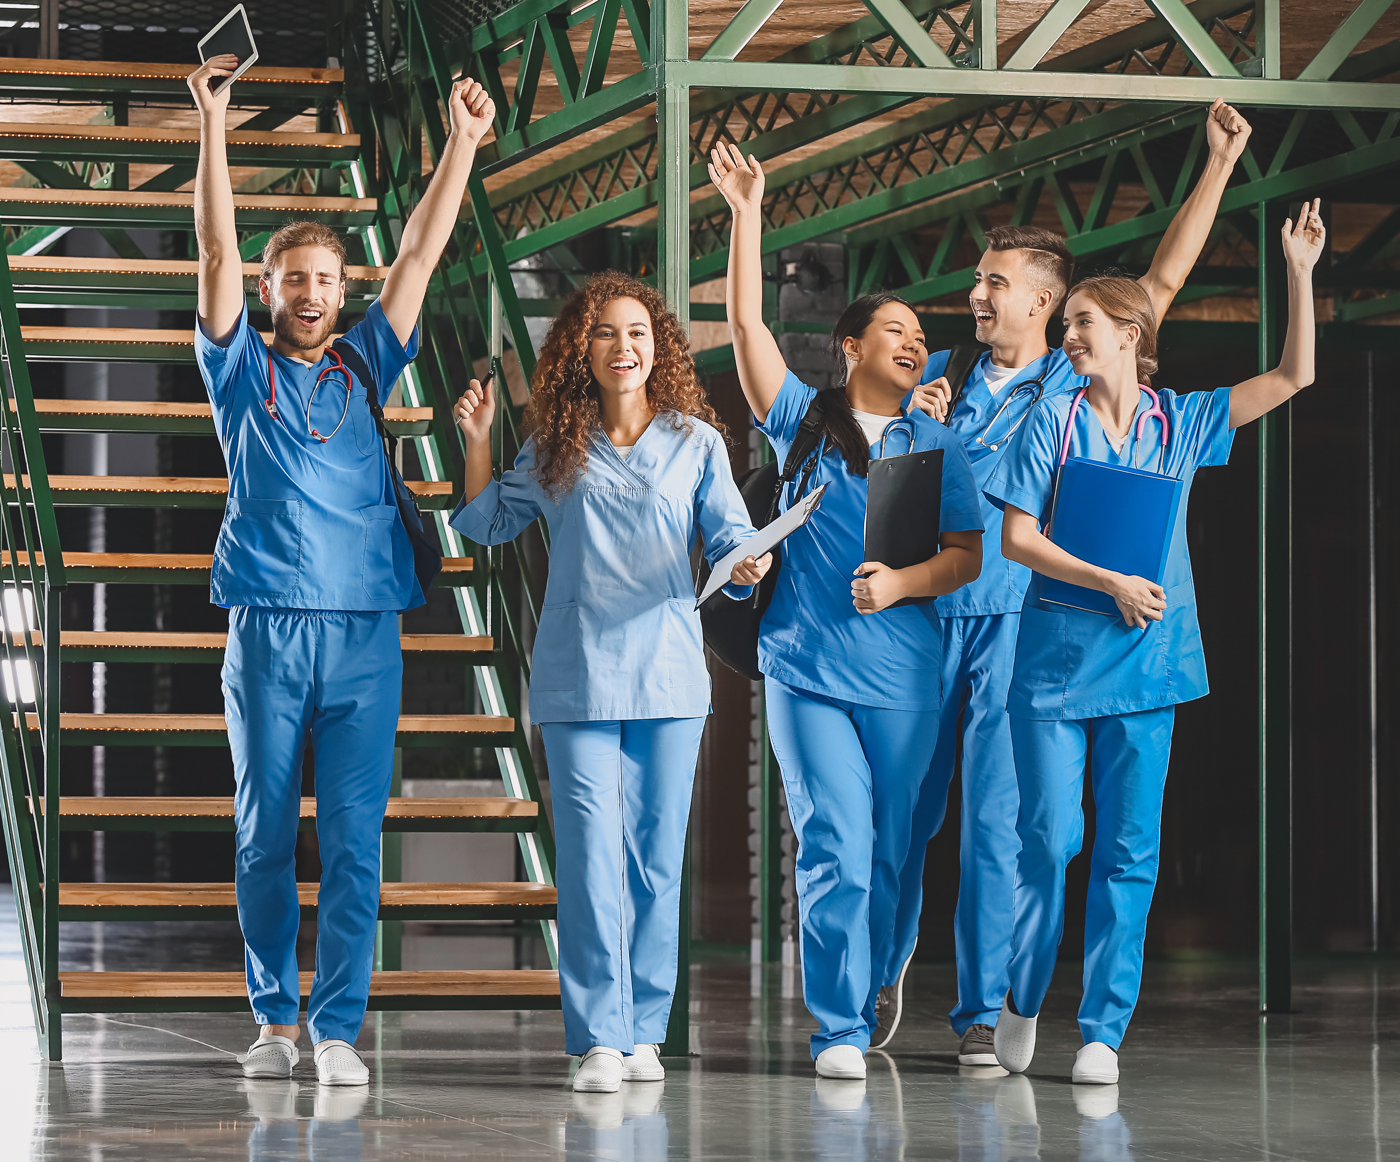 NCLEX pass rate: Group of nurses cheer while walking together